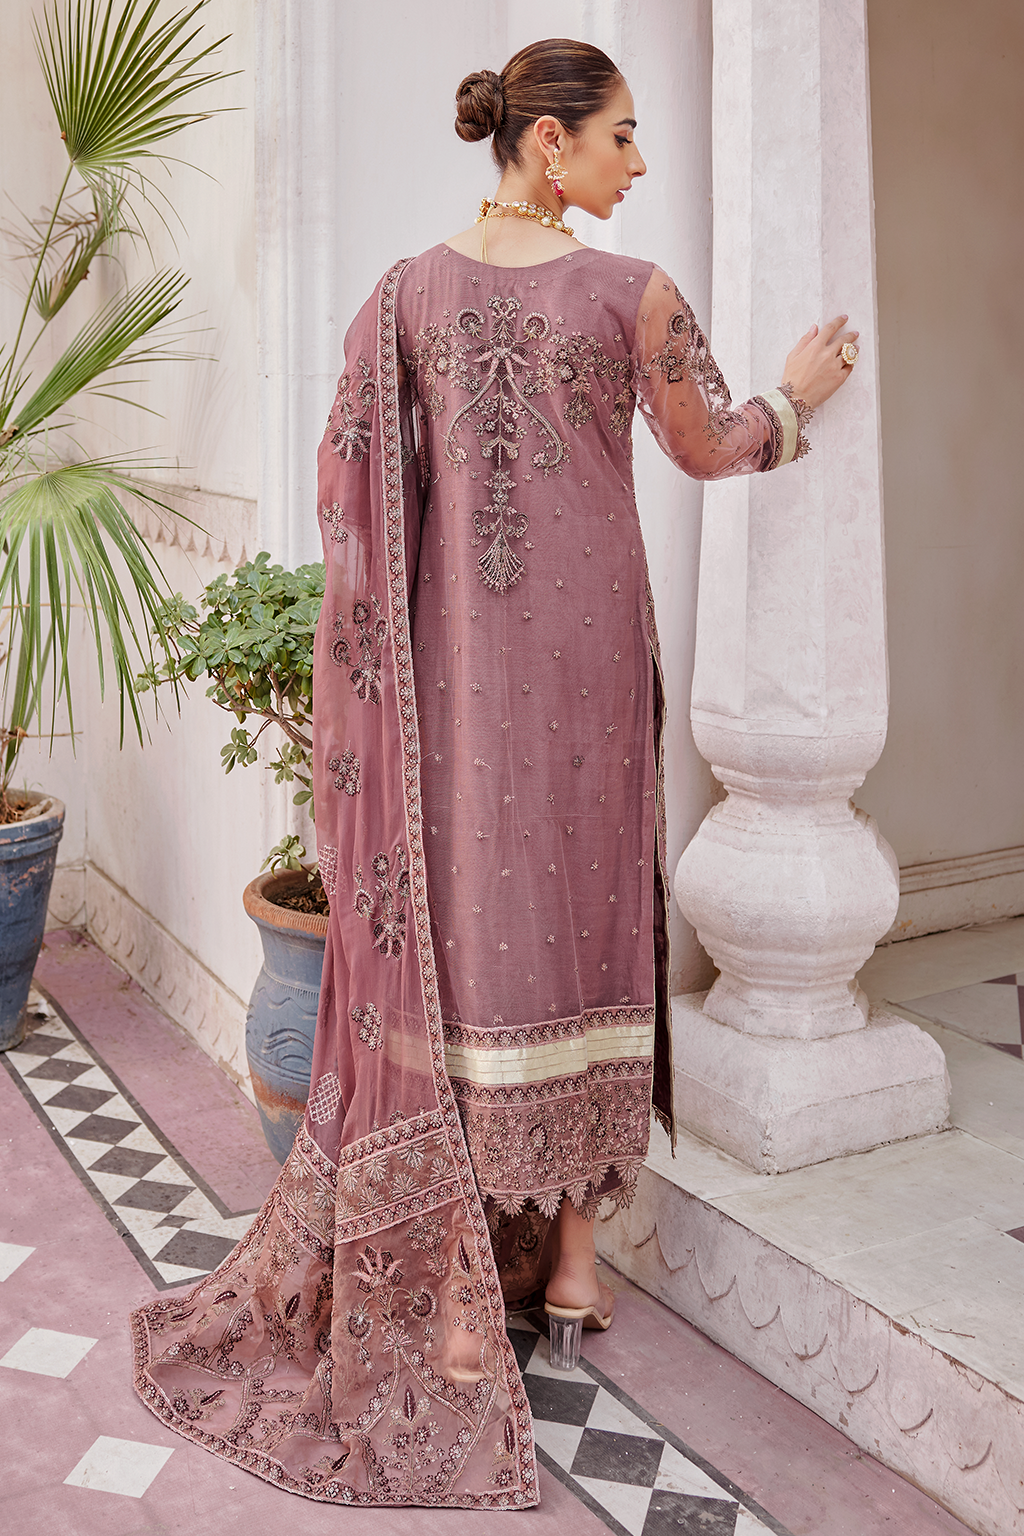 Luxe Chiffon by Emaan Adeel (LX 10)